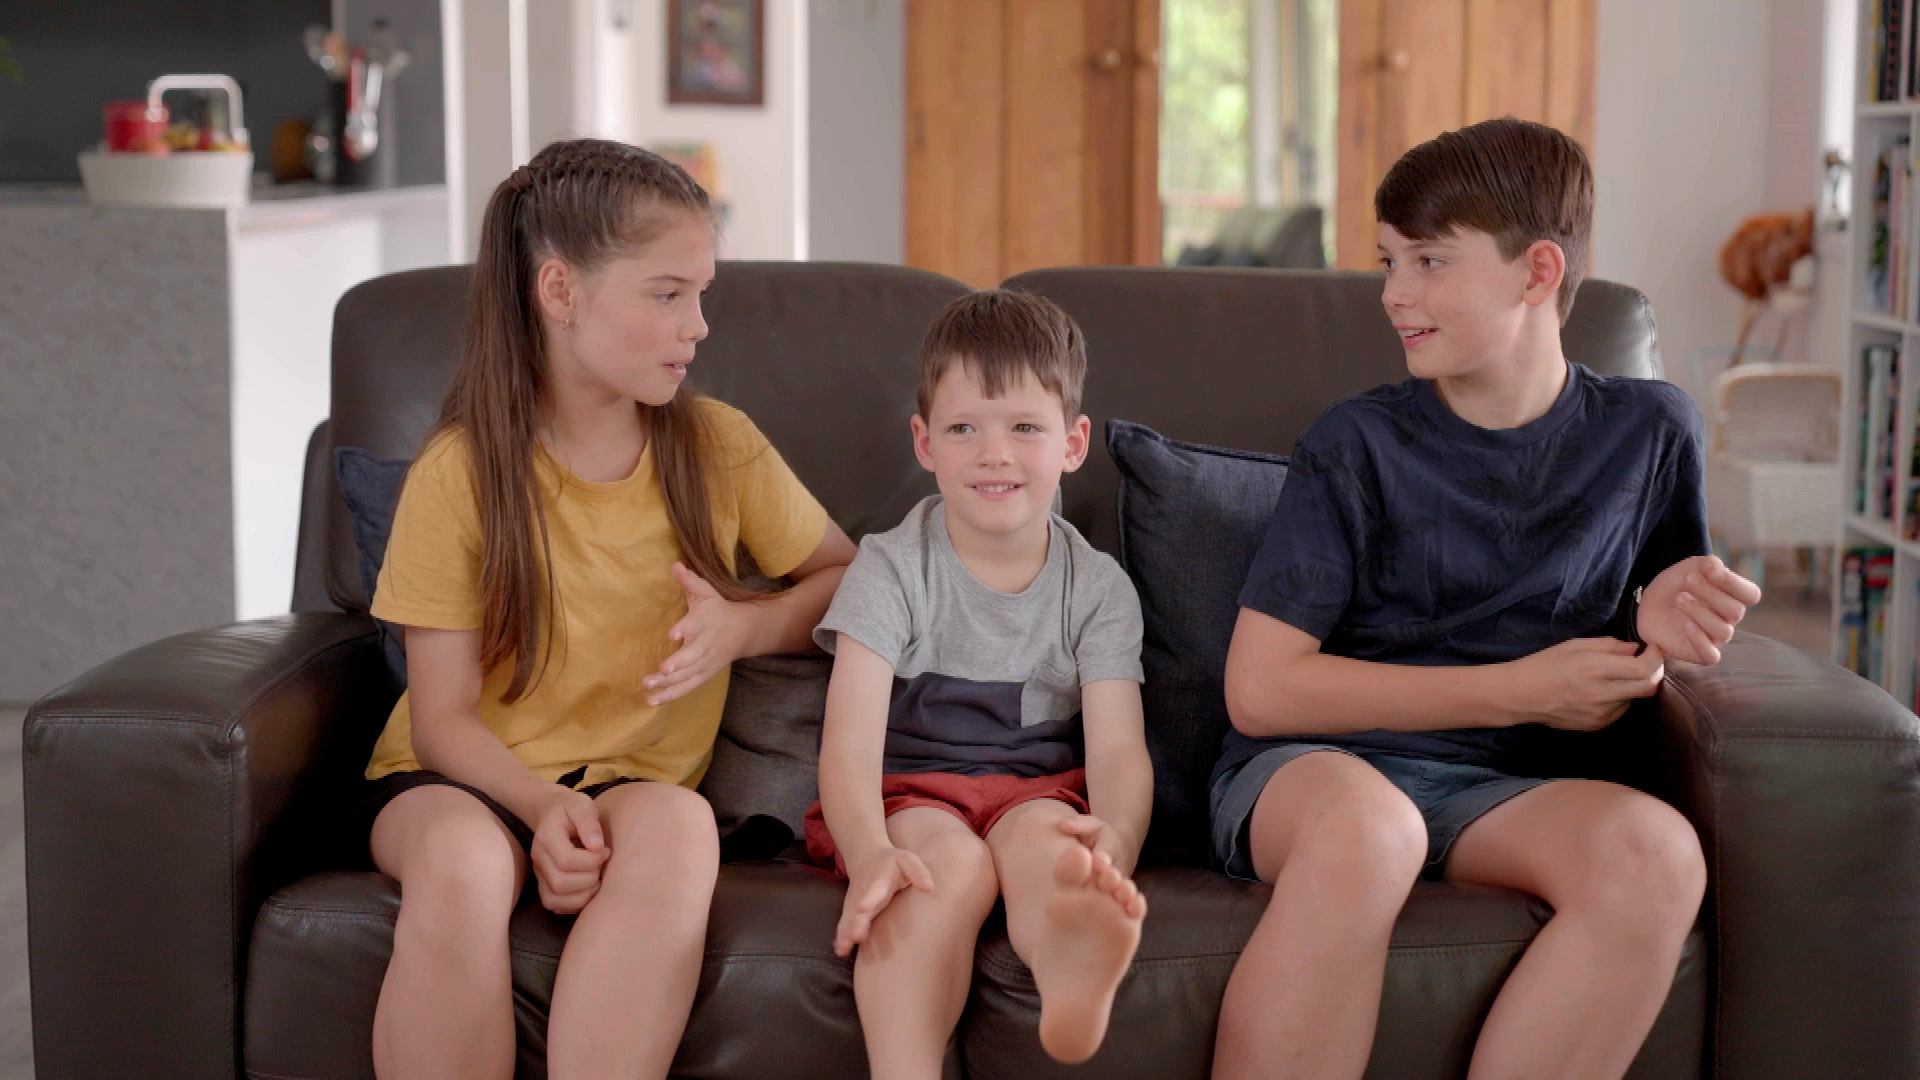 Exclusive: Kids reveal the 'rules' in their family homes